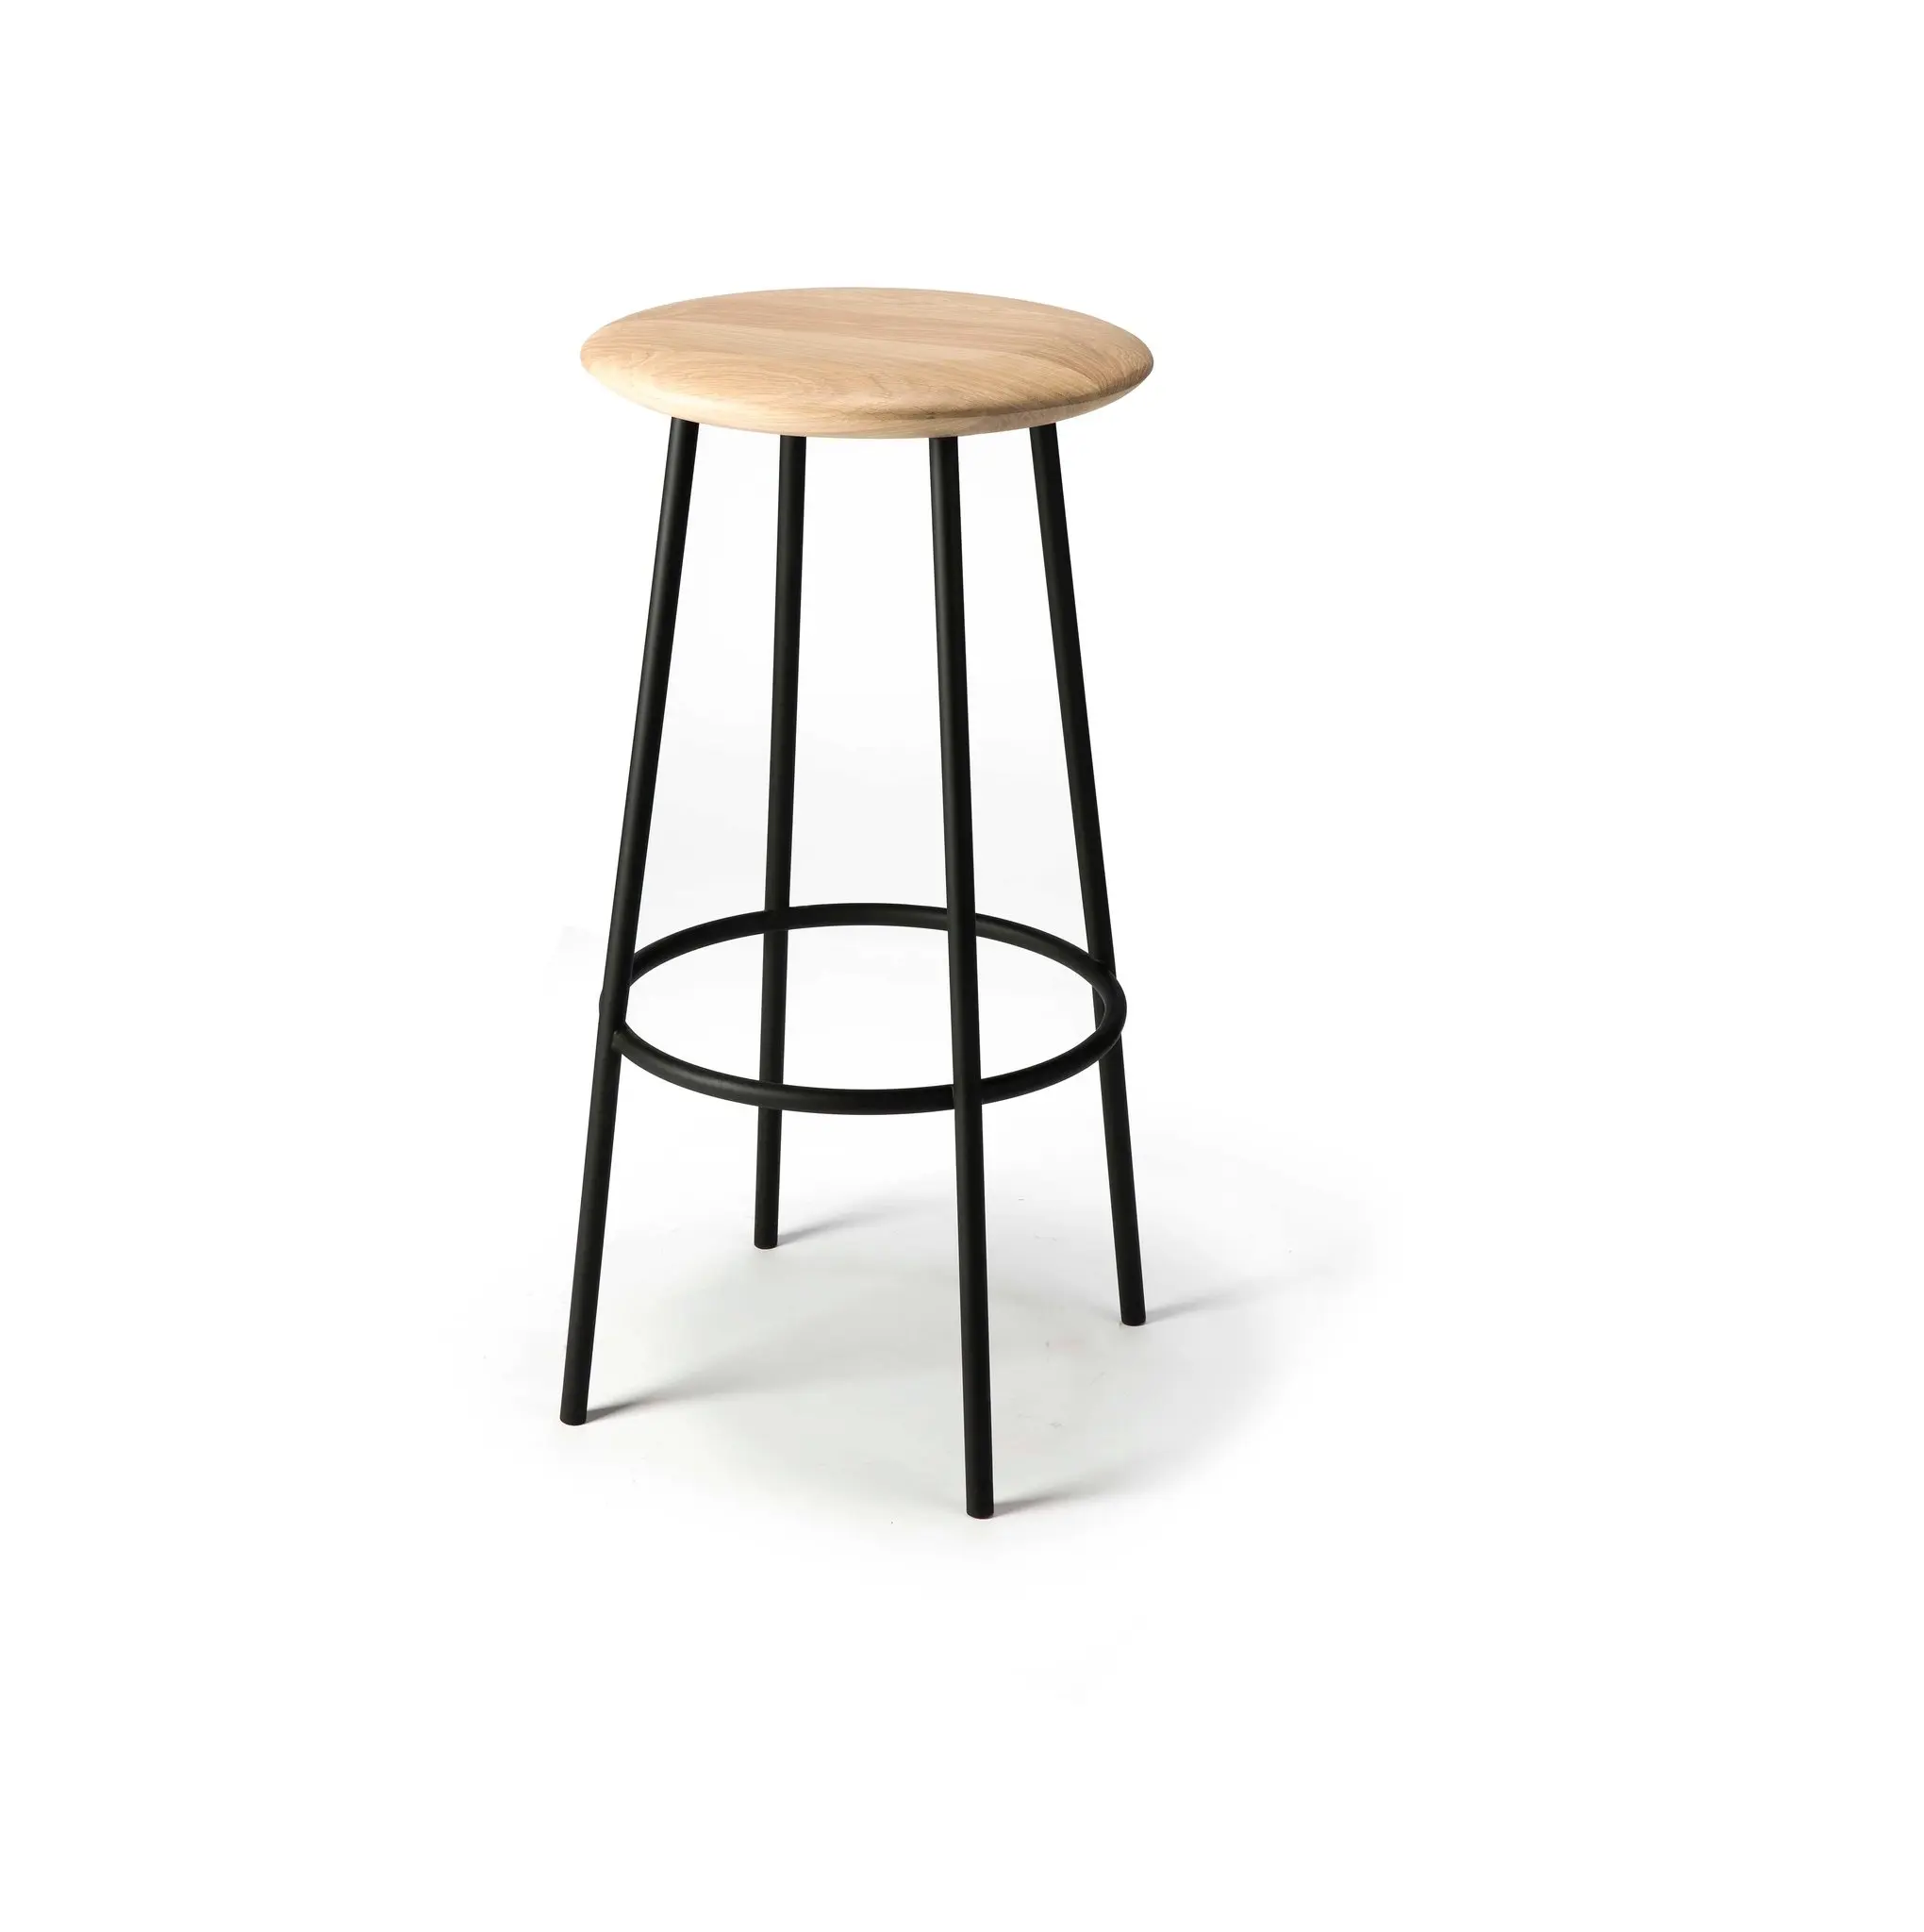 Wooden Combo Metal Design Stool With Colored Finishing Design For Living Room Bar Decor And Home Decor Stools